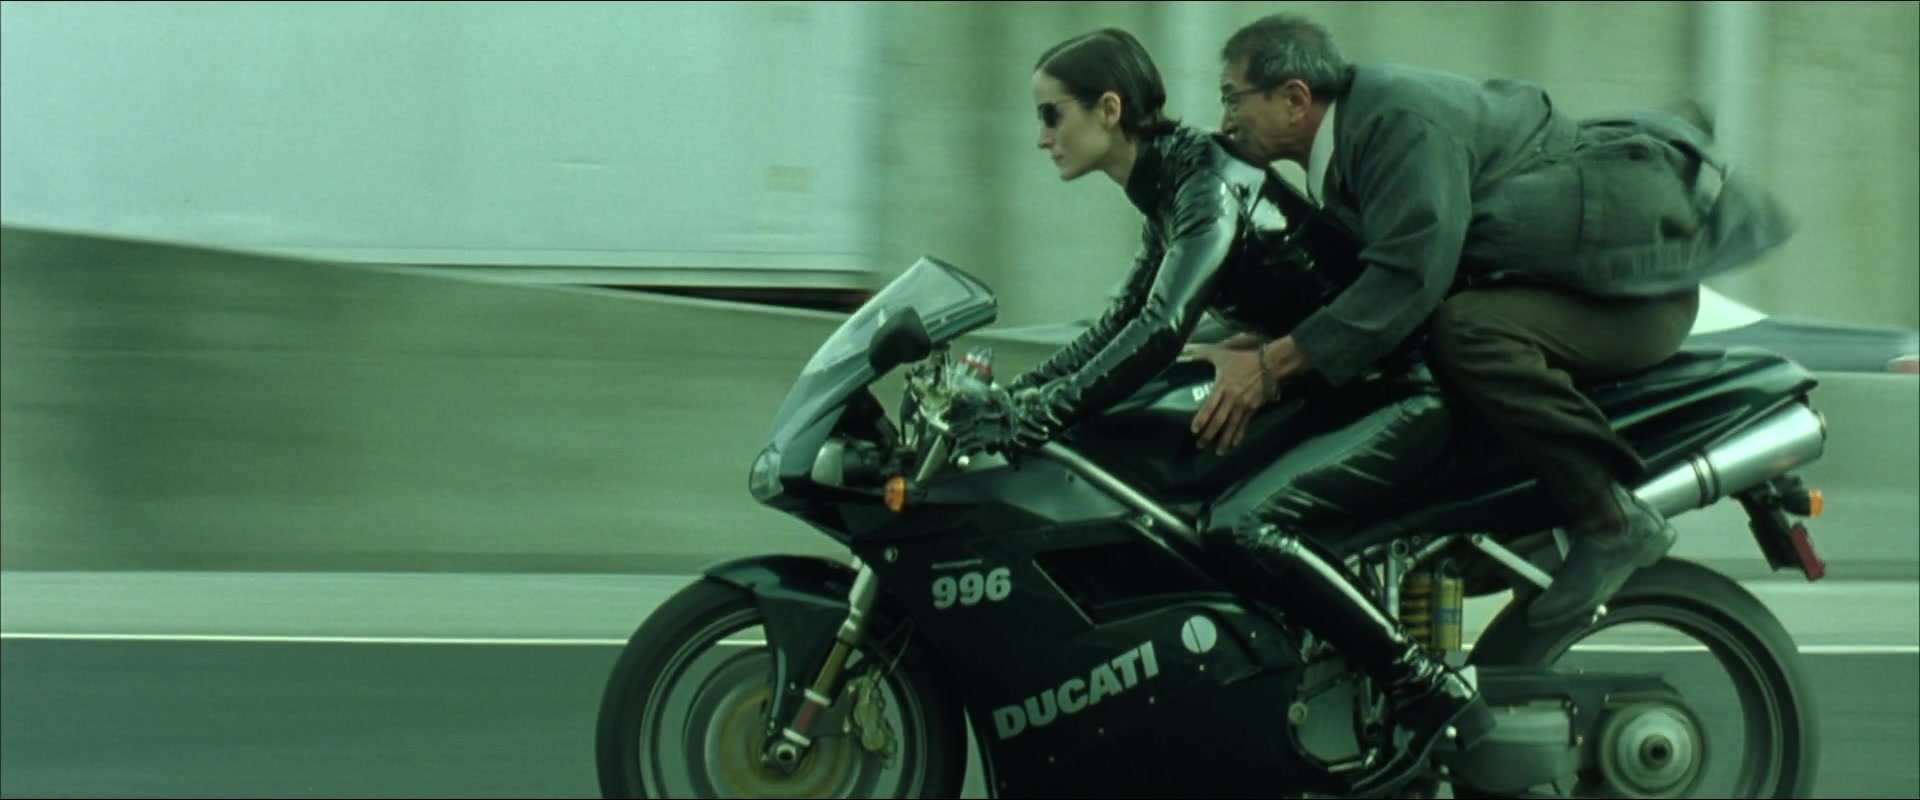 Ducati 996 Motorcycle in The Matrix Reloaded (2003) Movie1920 x 800